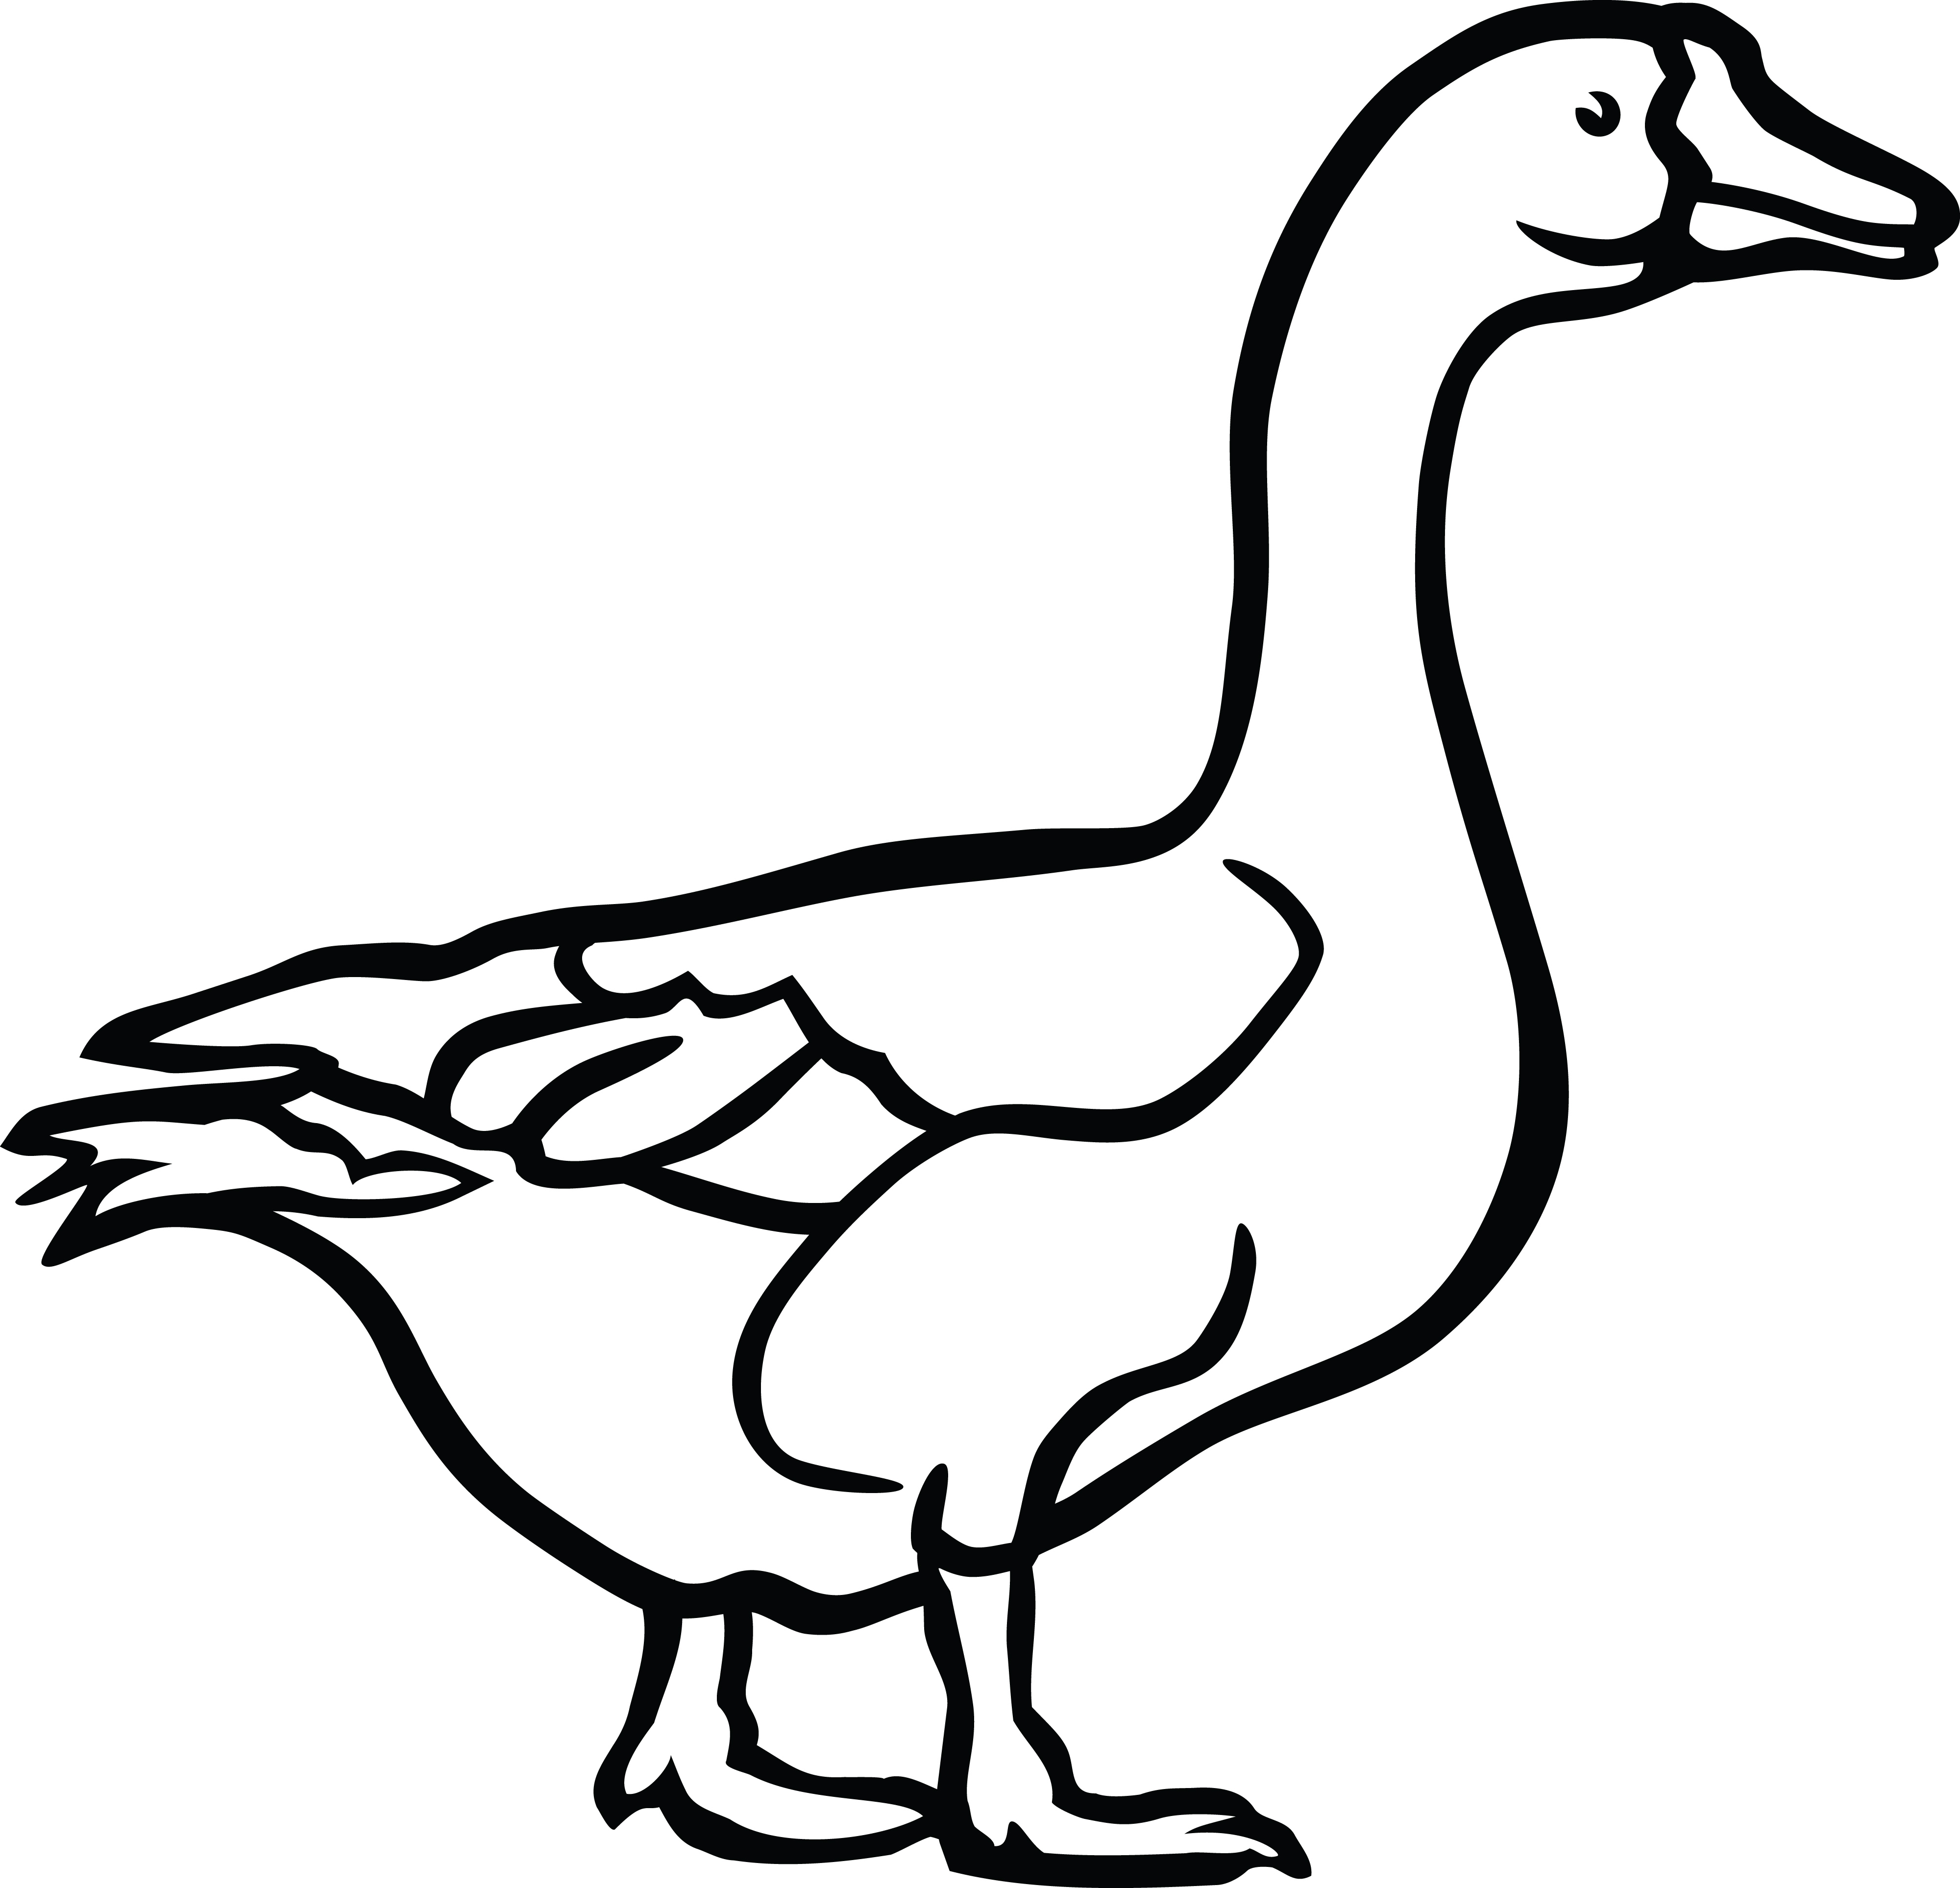 Free Clipart Of A Goose in black and white